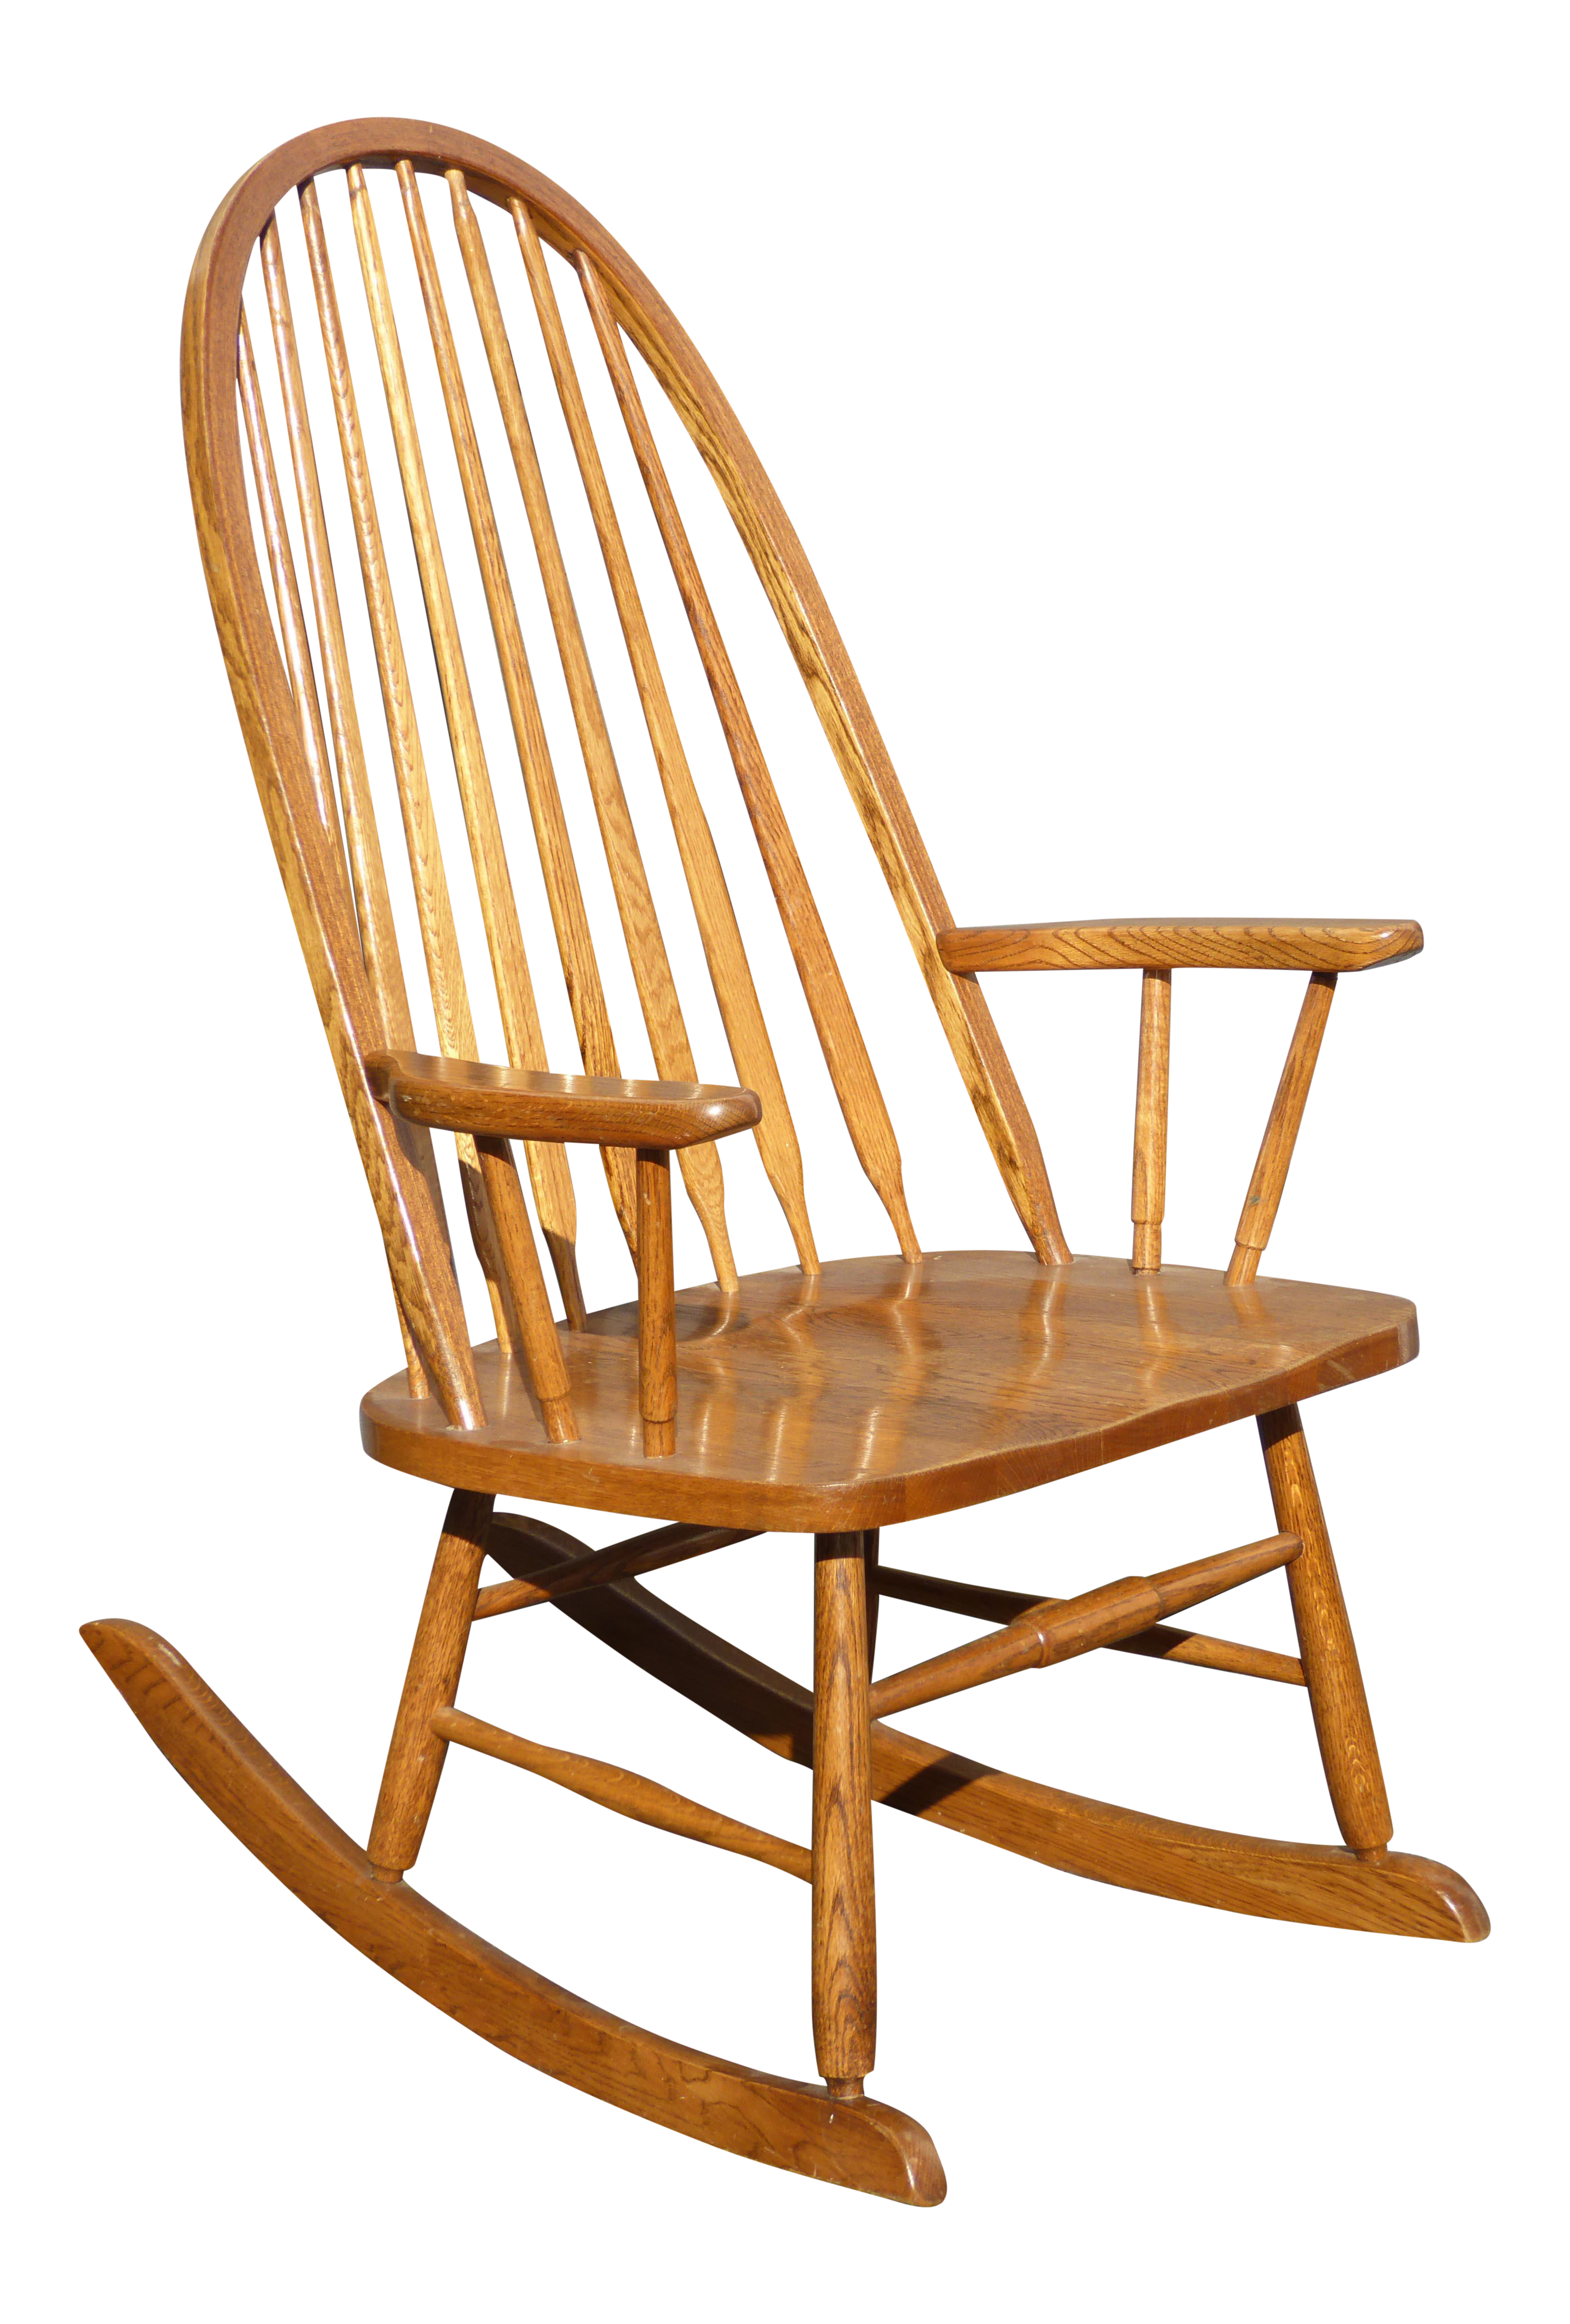 Amusing Antique Oak Rocking Chair Hd Photos Bed With Cane Seat Tiger ...